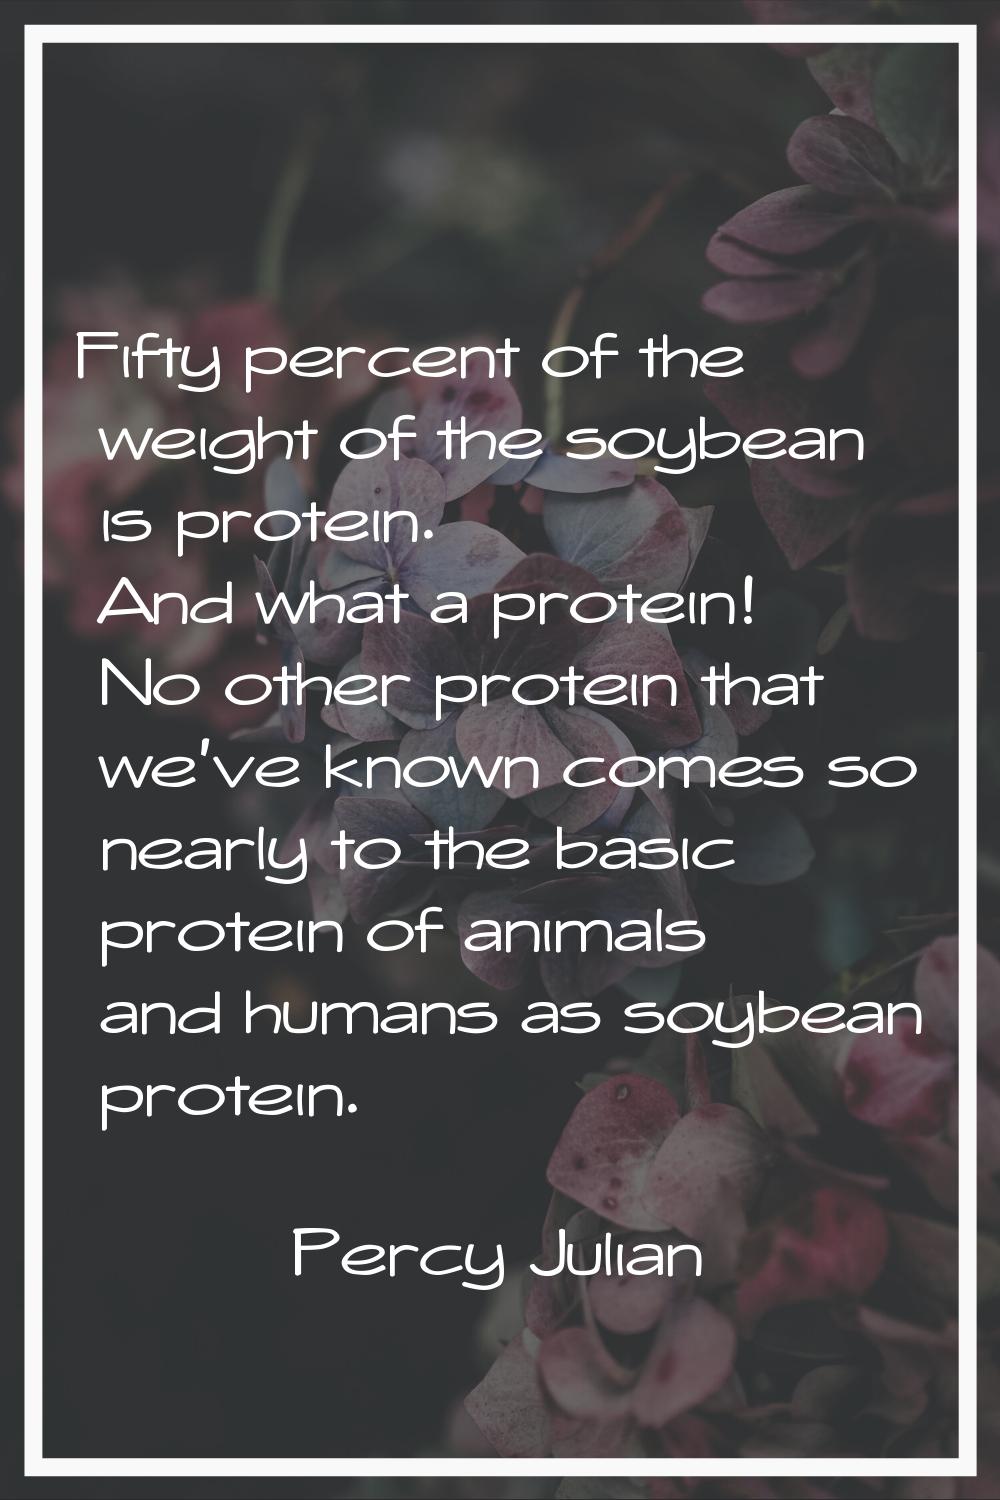 Fifty percent of the weight of the soybean is protein. And what a protein! No other protein that we